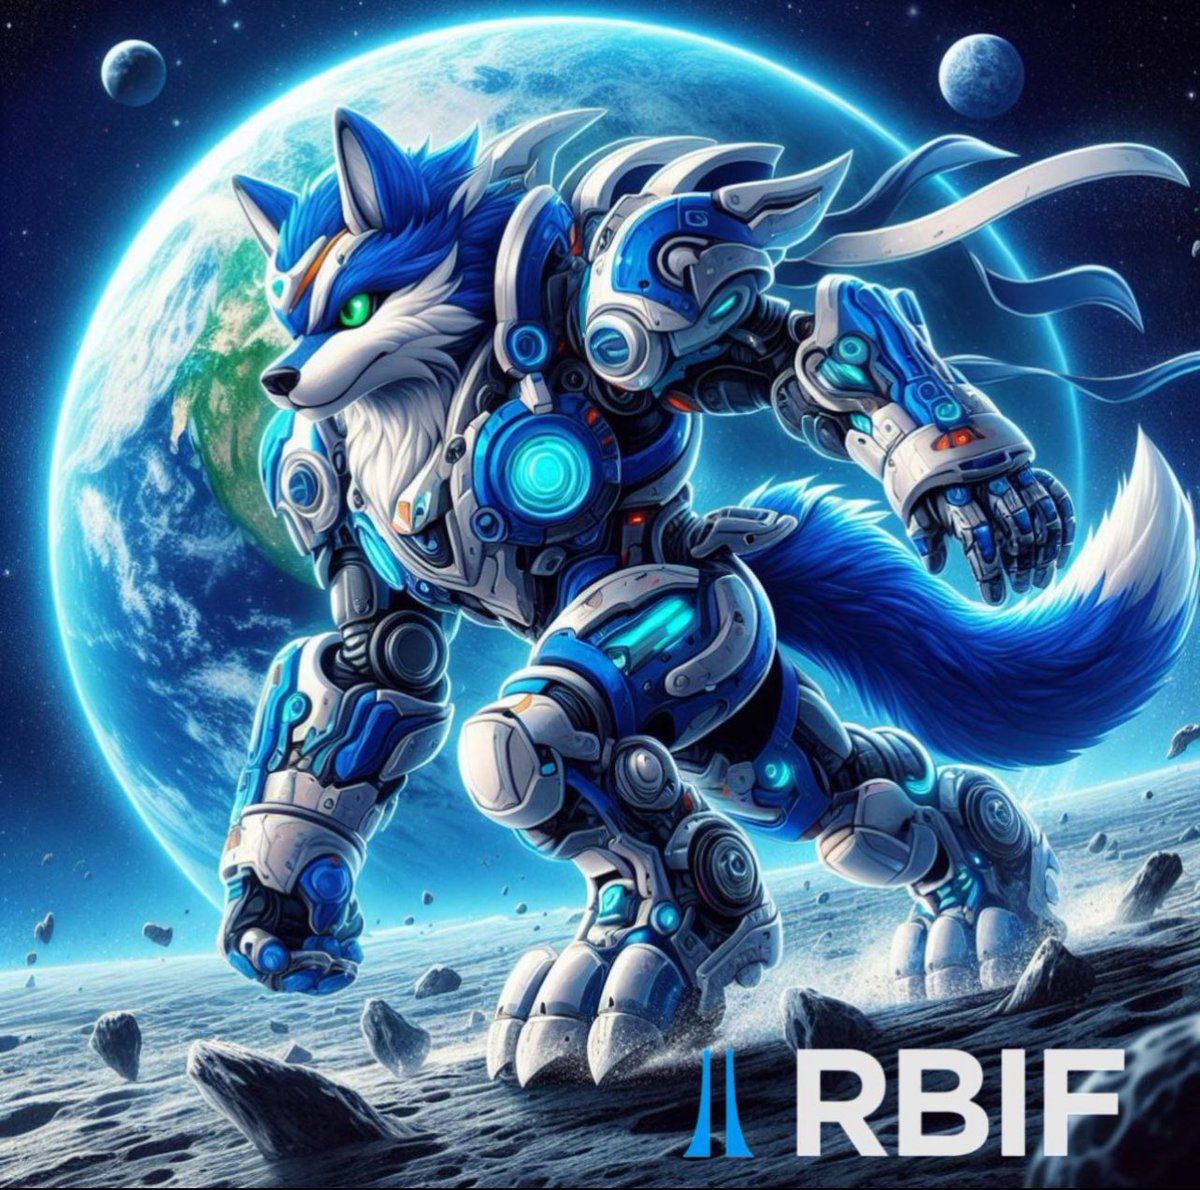 $RBIF Is currently sitting at just under an  11 million dollar market cap.  We will not stop until we reach a goal of 1 billion and beyond! Join us and help write the story of #RoboInu! 

#RGI_Info #RoboWarriors #RoboEx #RGIWallet #NFTBS #NFTBOOKS #WAGMI #Solana #SolanaMemecoin…